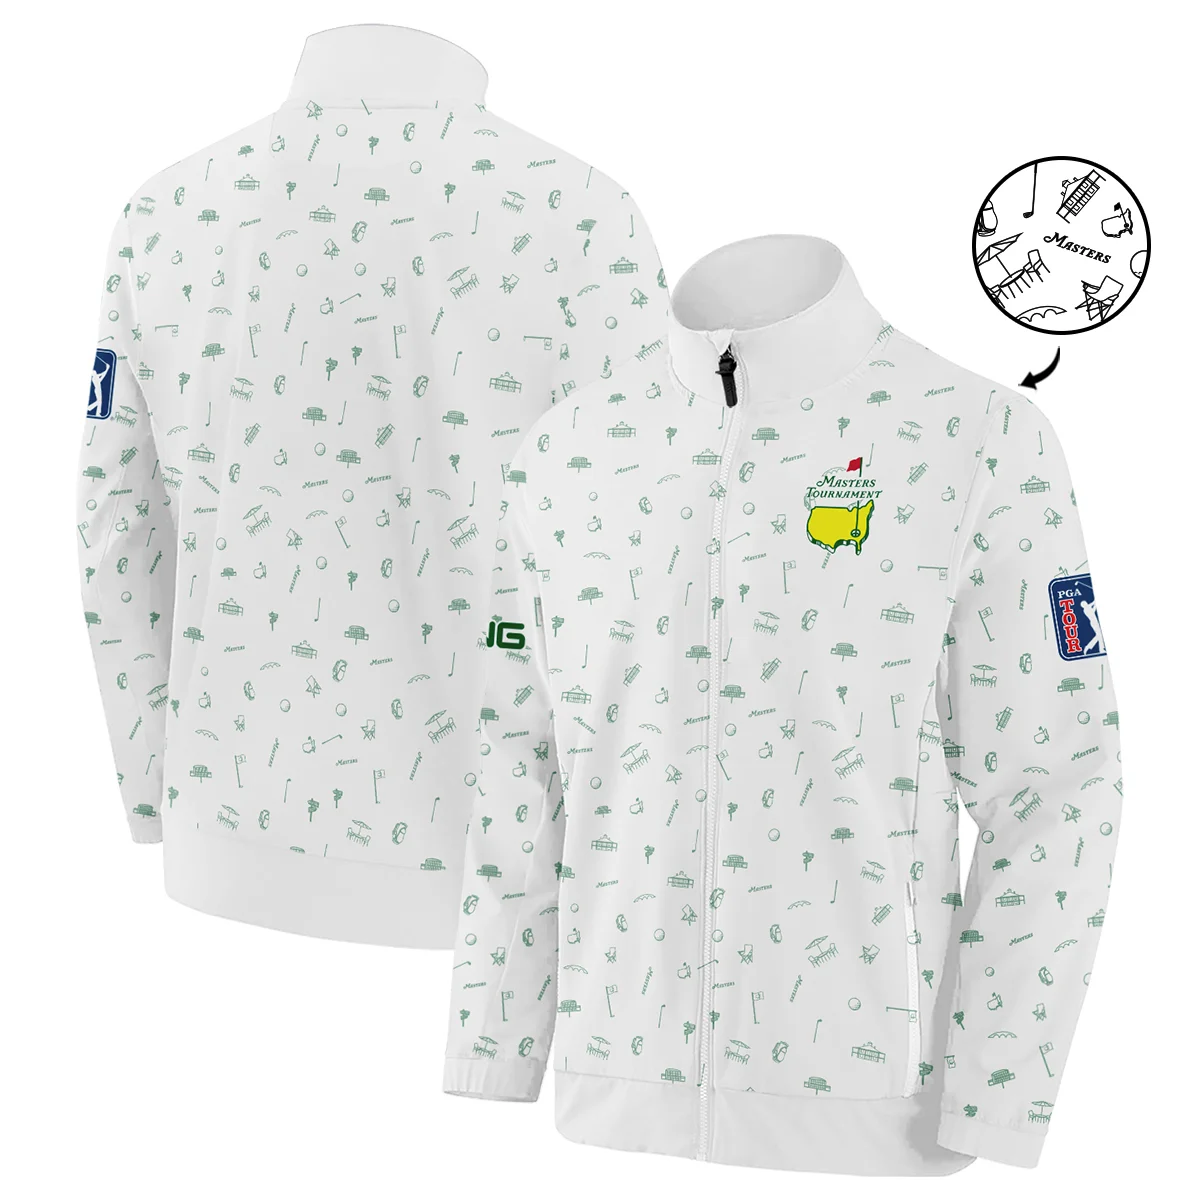 Golf Masters Tournament Ping Bomber Jacket Augusta Icons Pattern White Green Golf Sports All Over Print Bomber Jacket